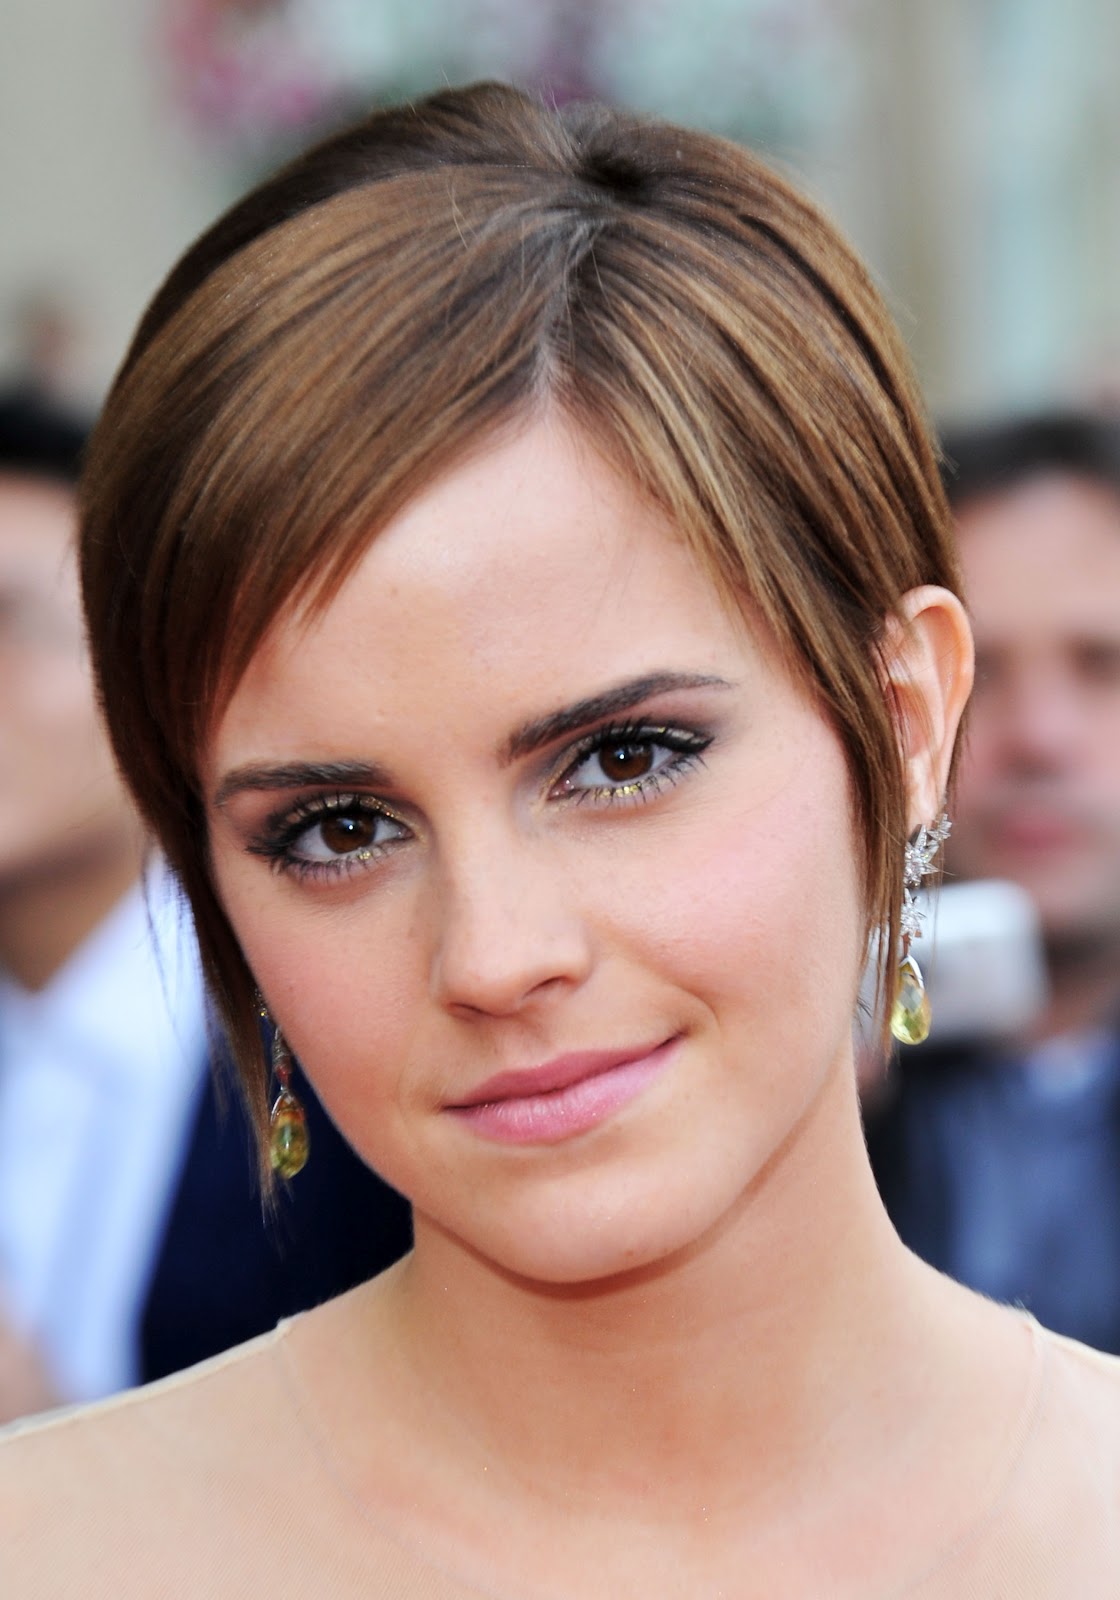 Pixie cuts, as shown here by Emma Watson, Alison Lohman, and Carey ...